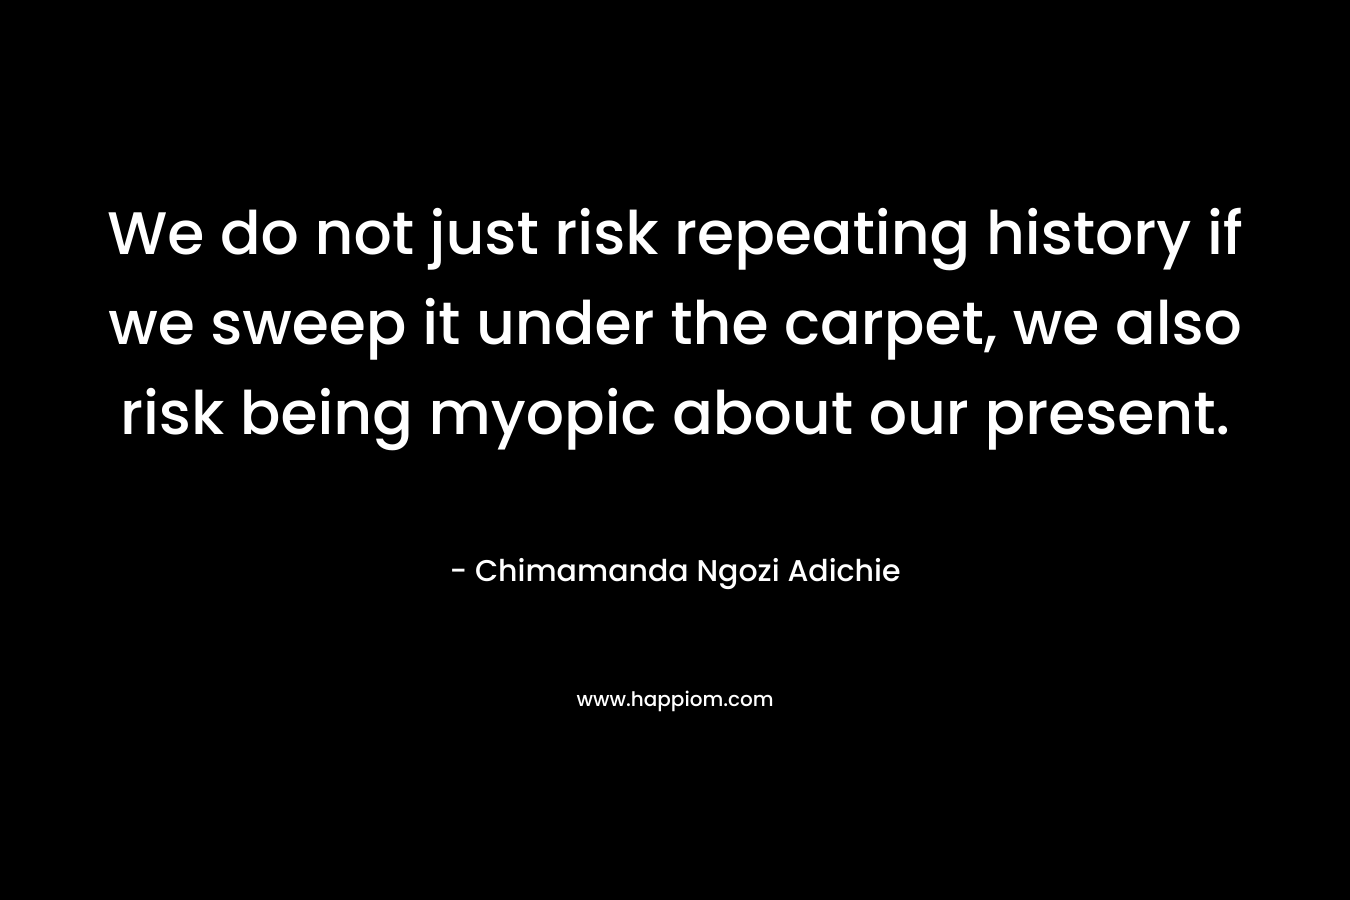 We do not just risk repeating history if we sweep it under the carpet, we also risk being myopic about our present. – Chimamanda Ngozi Adichie